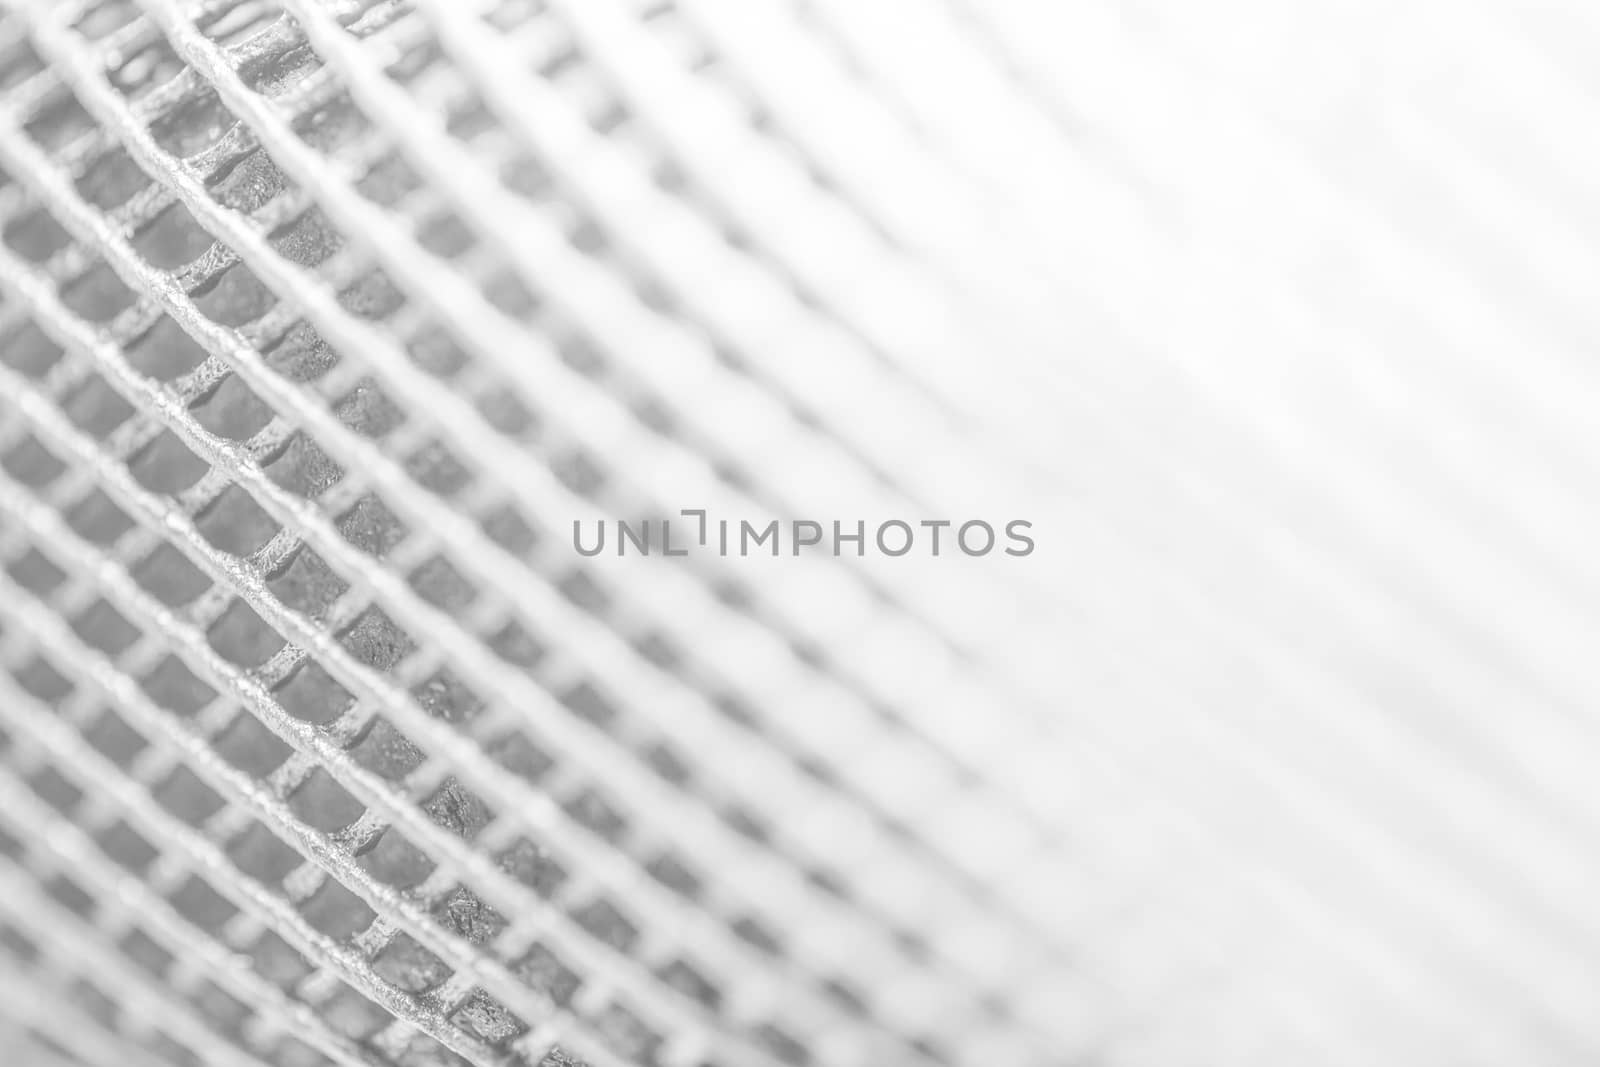 Abstract white background of grunged grid metal by Suriyaphoto